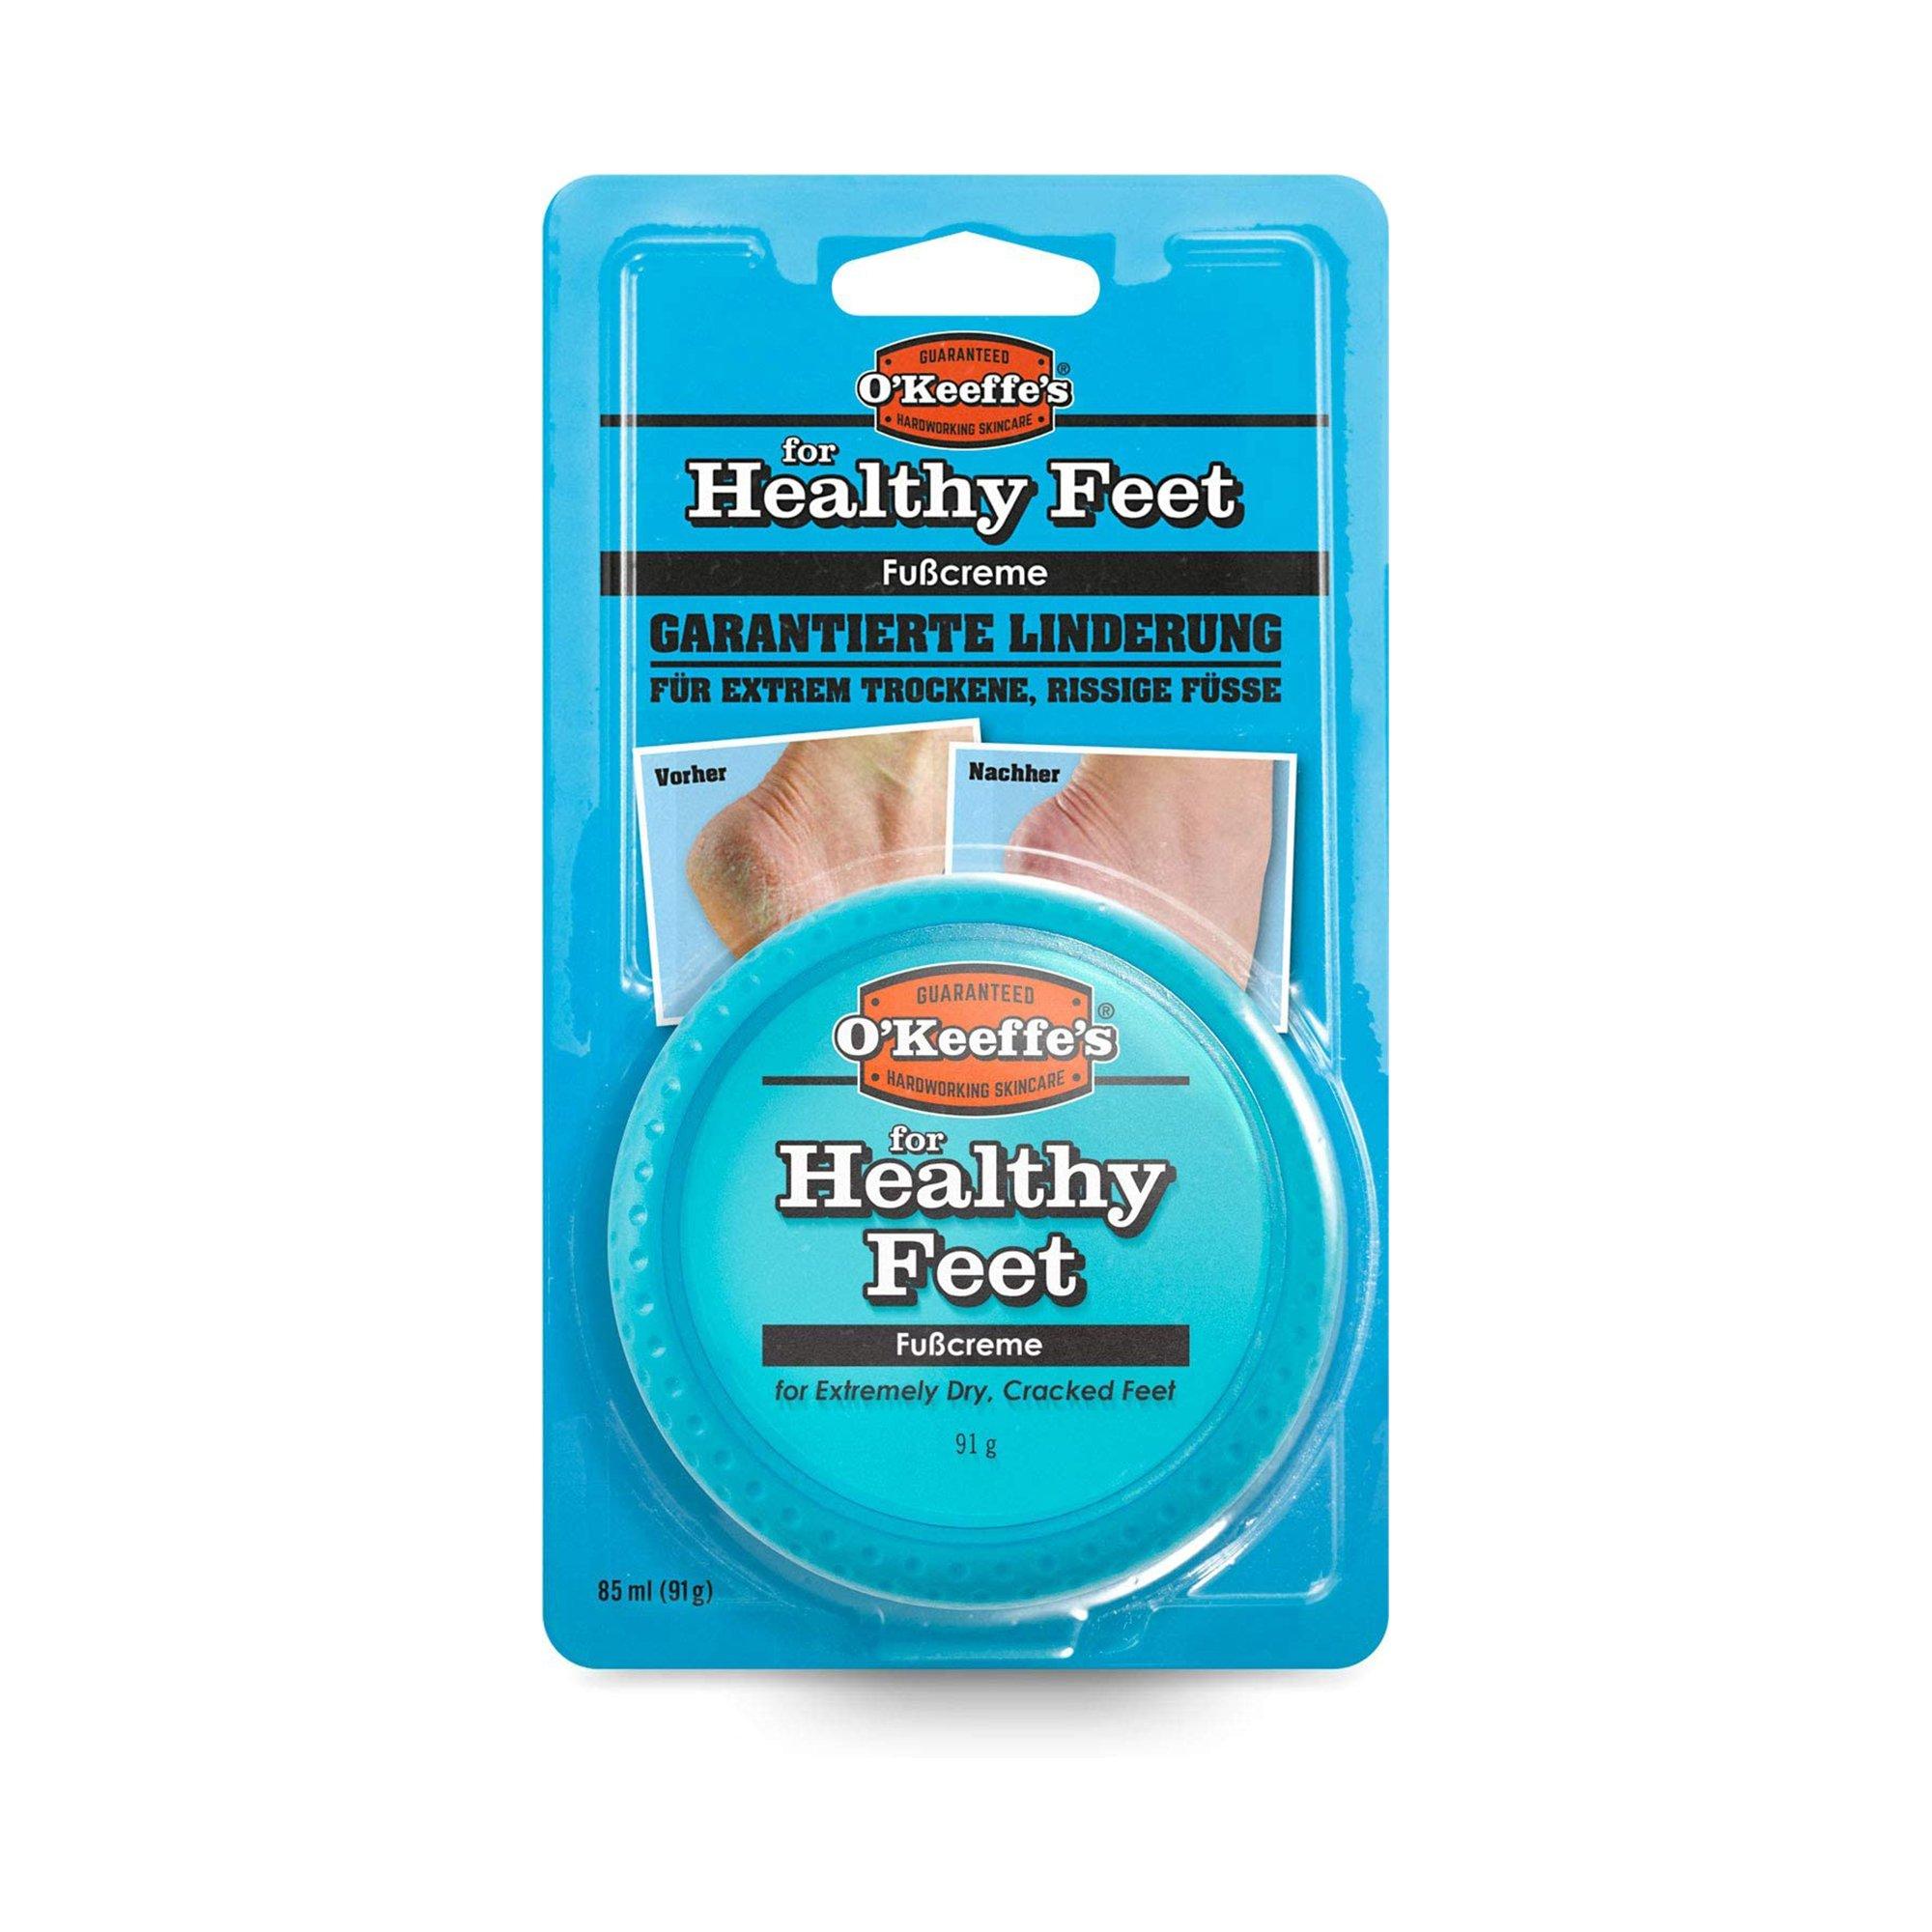 Image of O'Keeffe's Healthy Feet - Fusscreme 85ml Healthy Feet - Fusscreme - 85ml